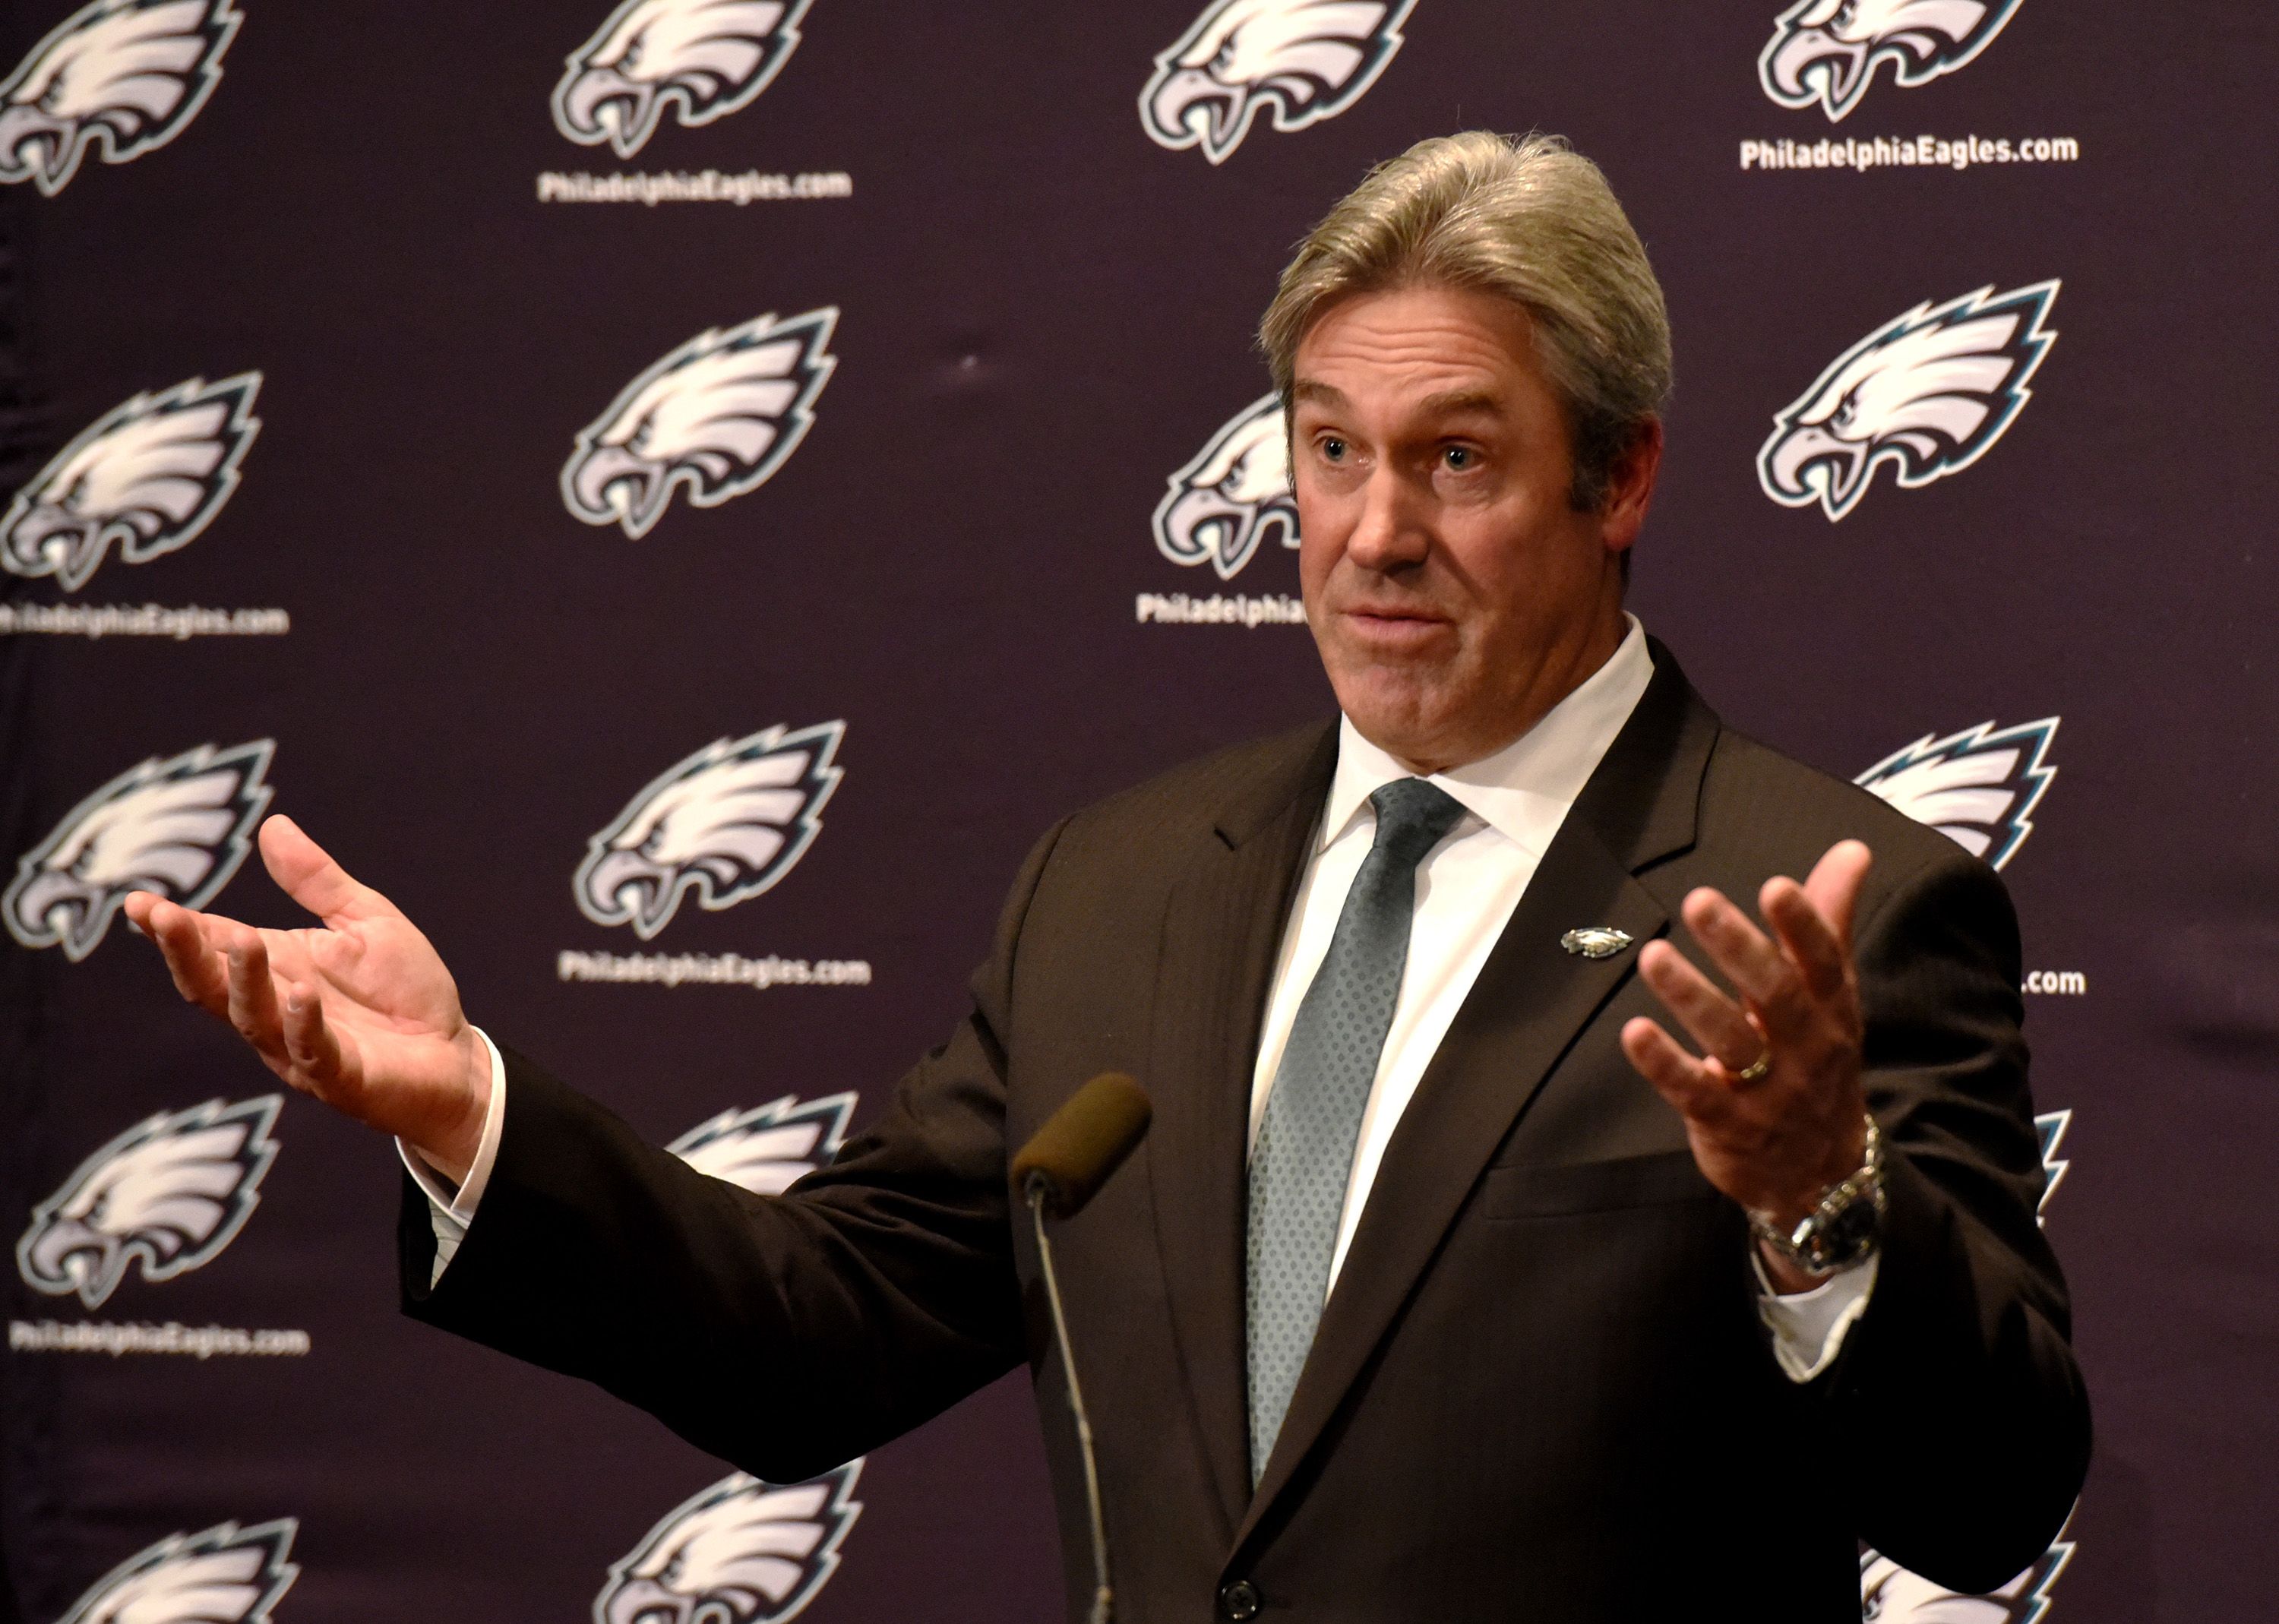 Philadelphia Eagles head coach Doug Pederson during a news conference at the NovaCare Complex in Philadelphia on Tuesday, Jan. 19, 2016. (Clem Murray/Philadelphia Inquirer/TNS)